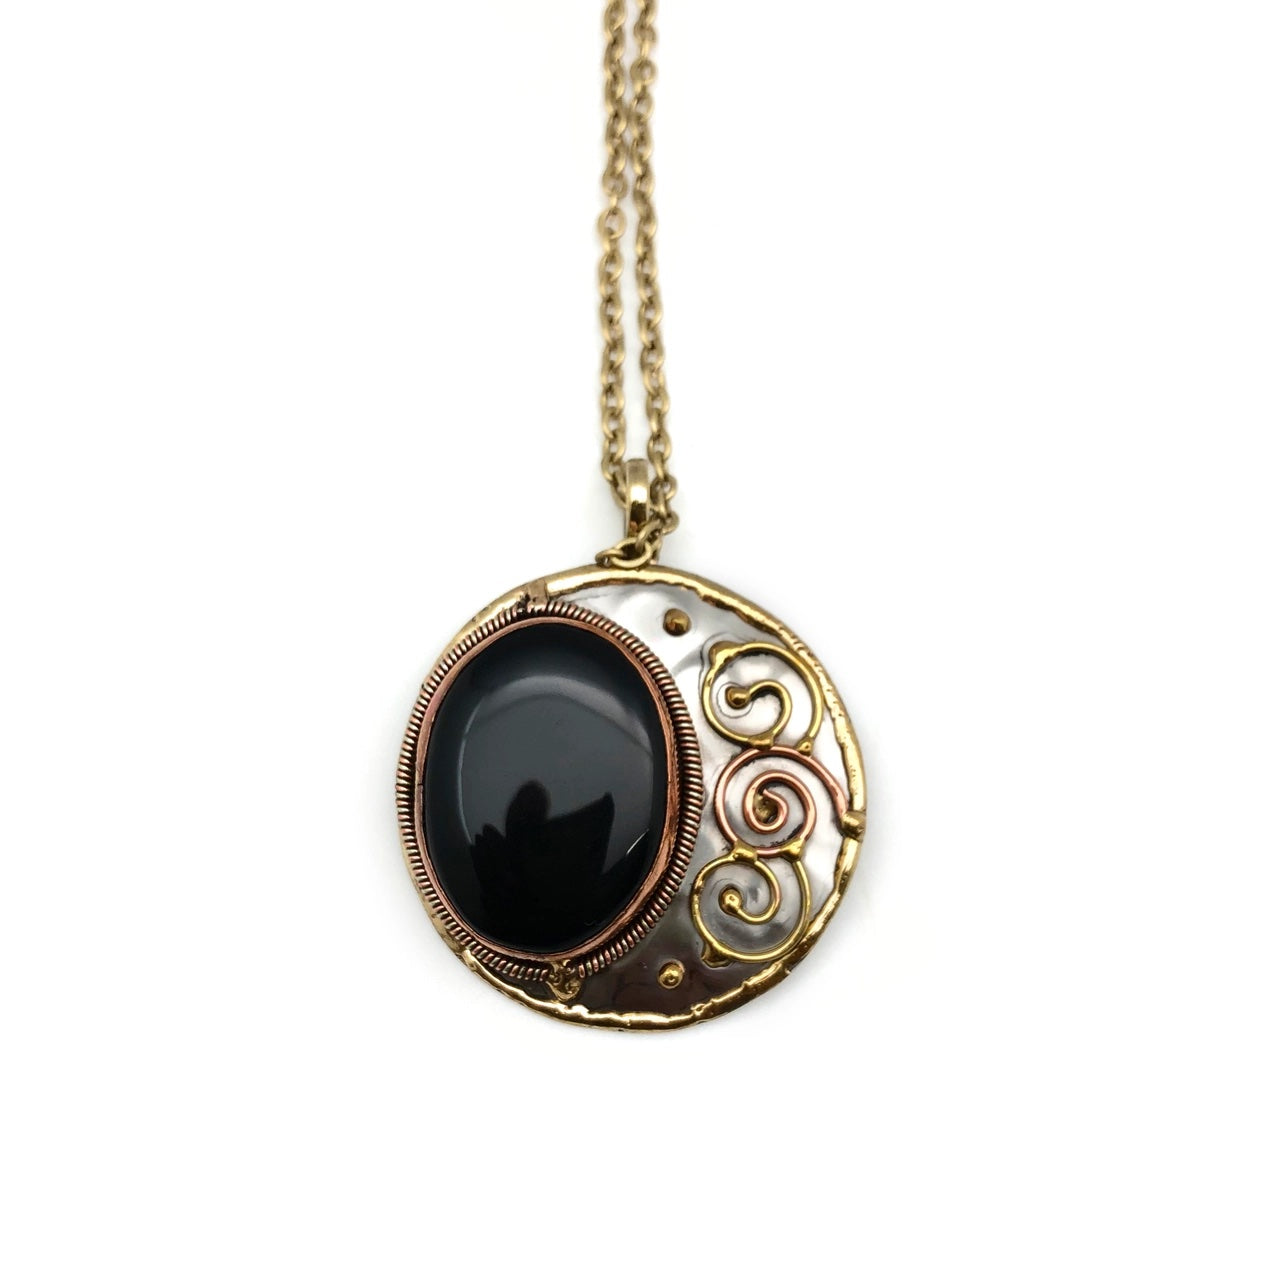 Anju Jewelry Black Onyx and Mixed Metal Necklace